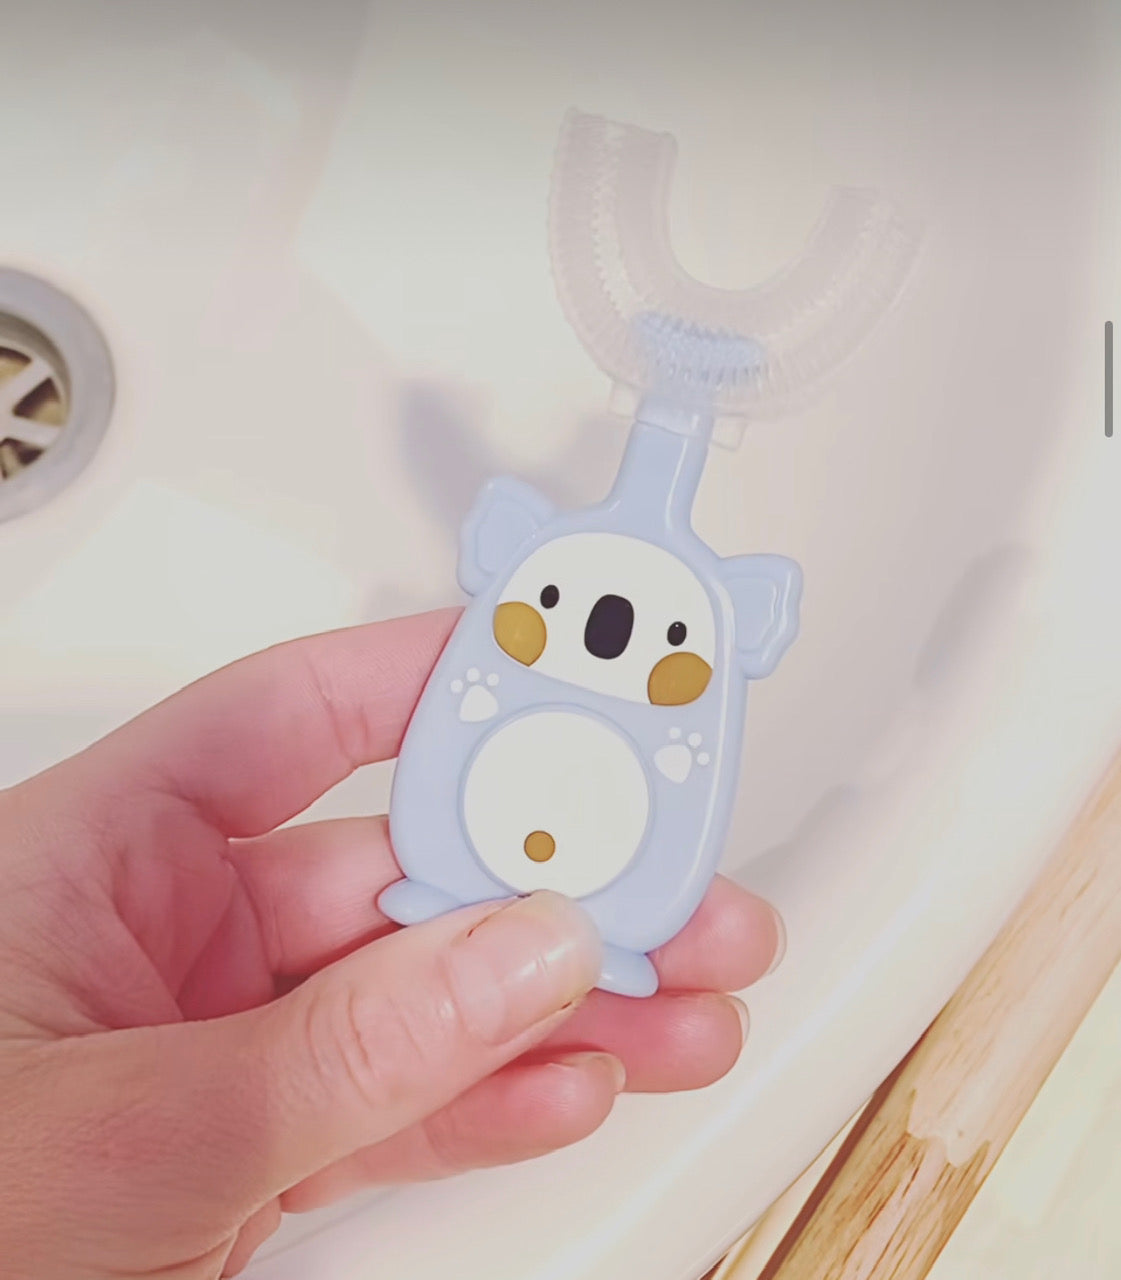 Easy-to-Use U-Shaped Toothbrush for Little Smiles